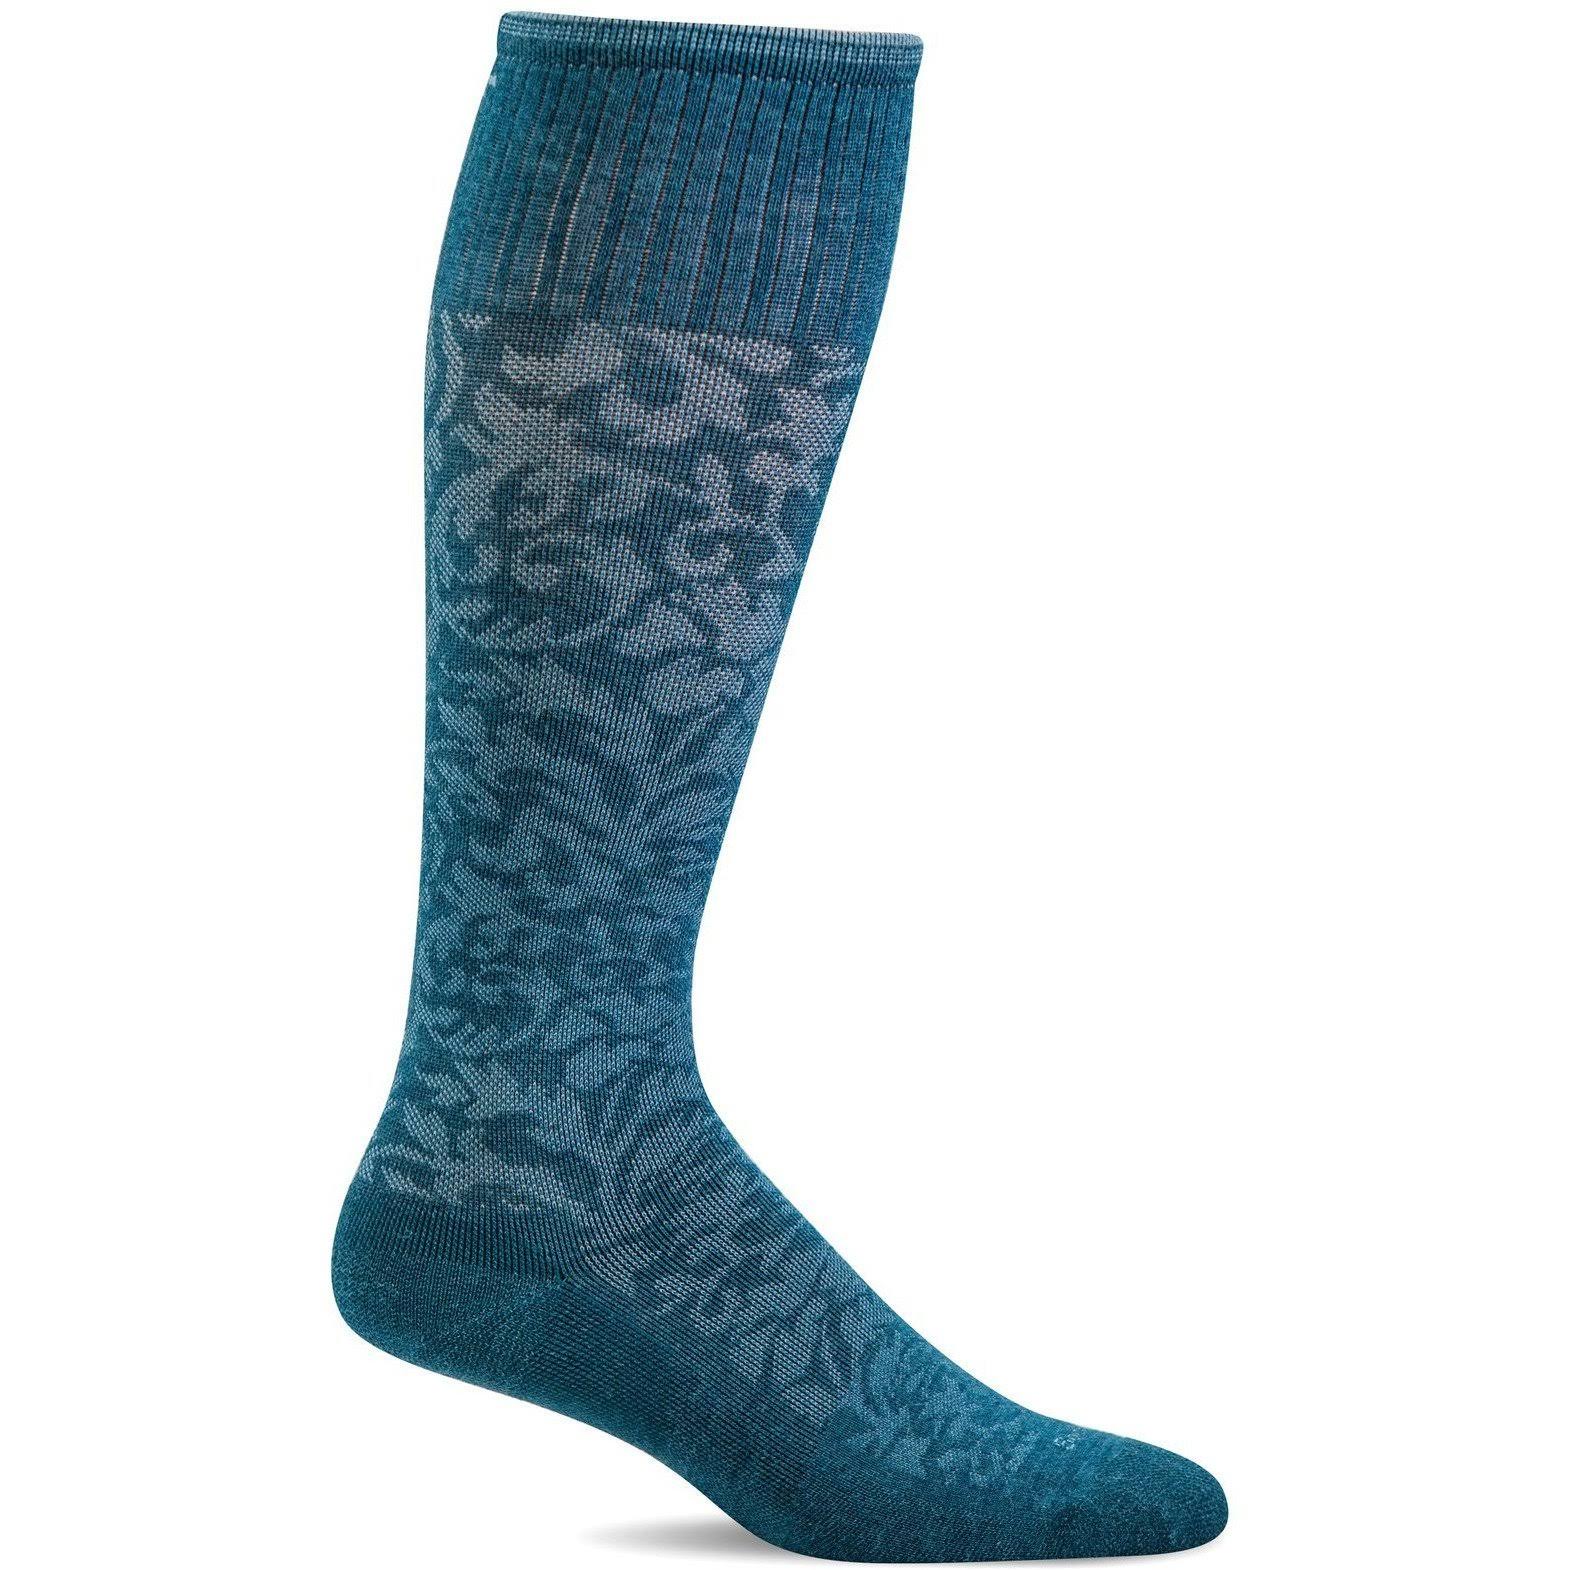 Sockwell Women's Damask Moderate Compression Socks, Clearance, Teal, M/L